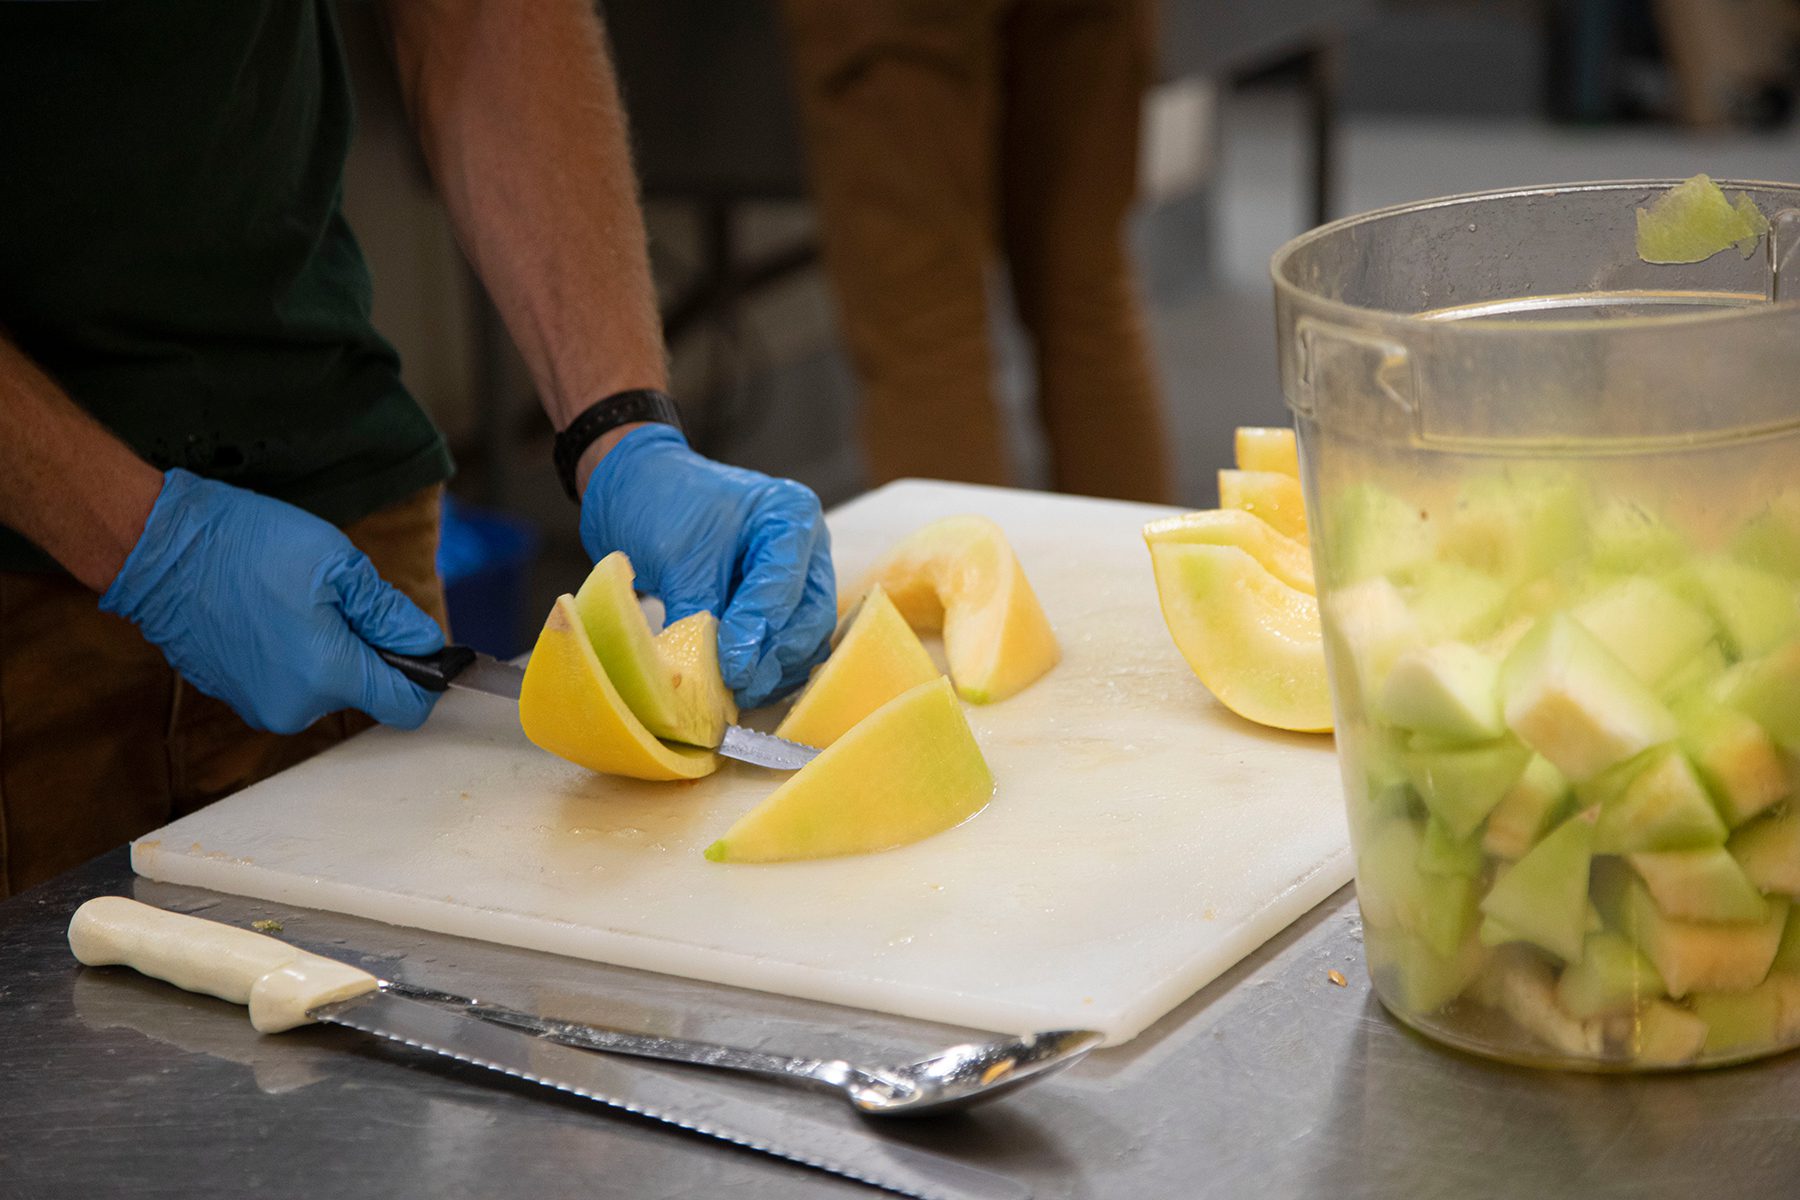 Chopping melons on a cutting board in a kitchen